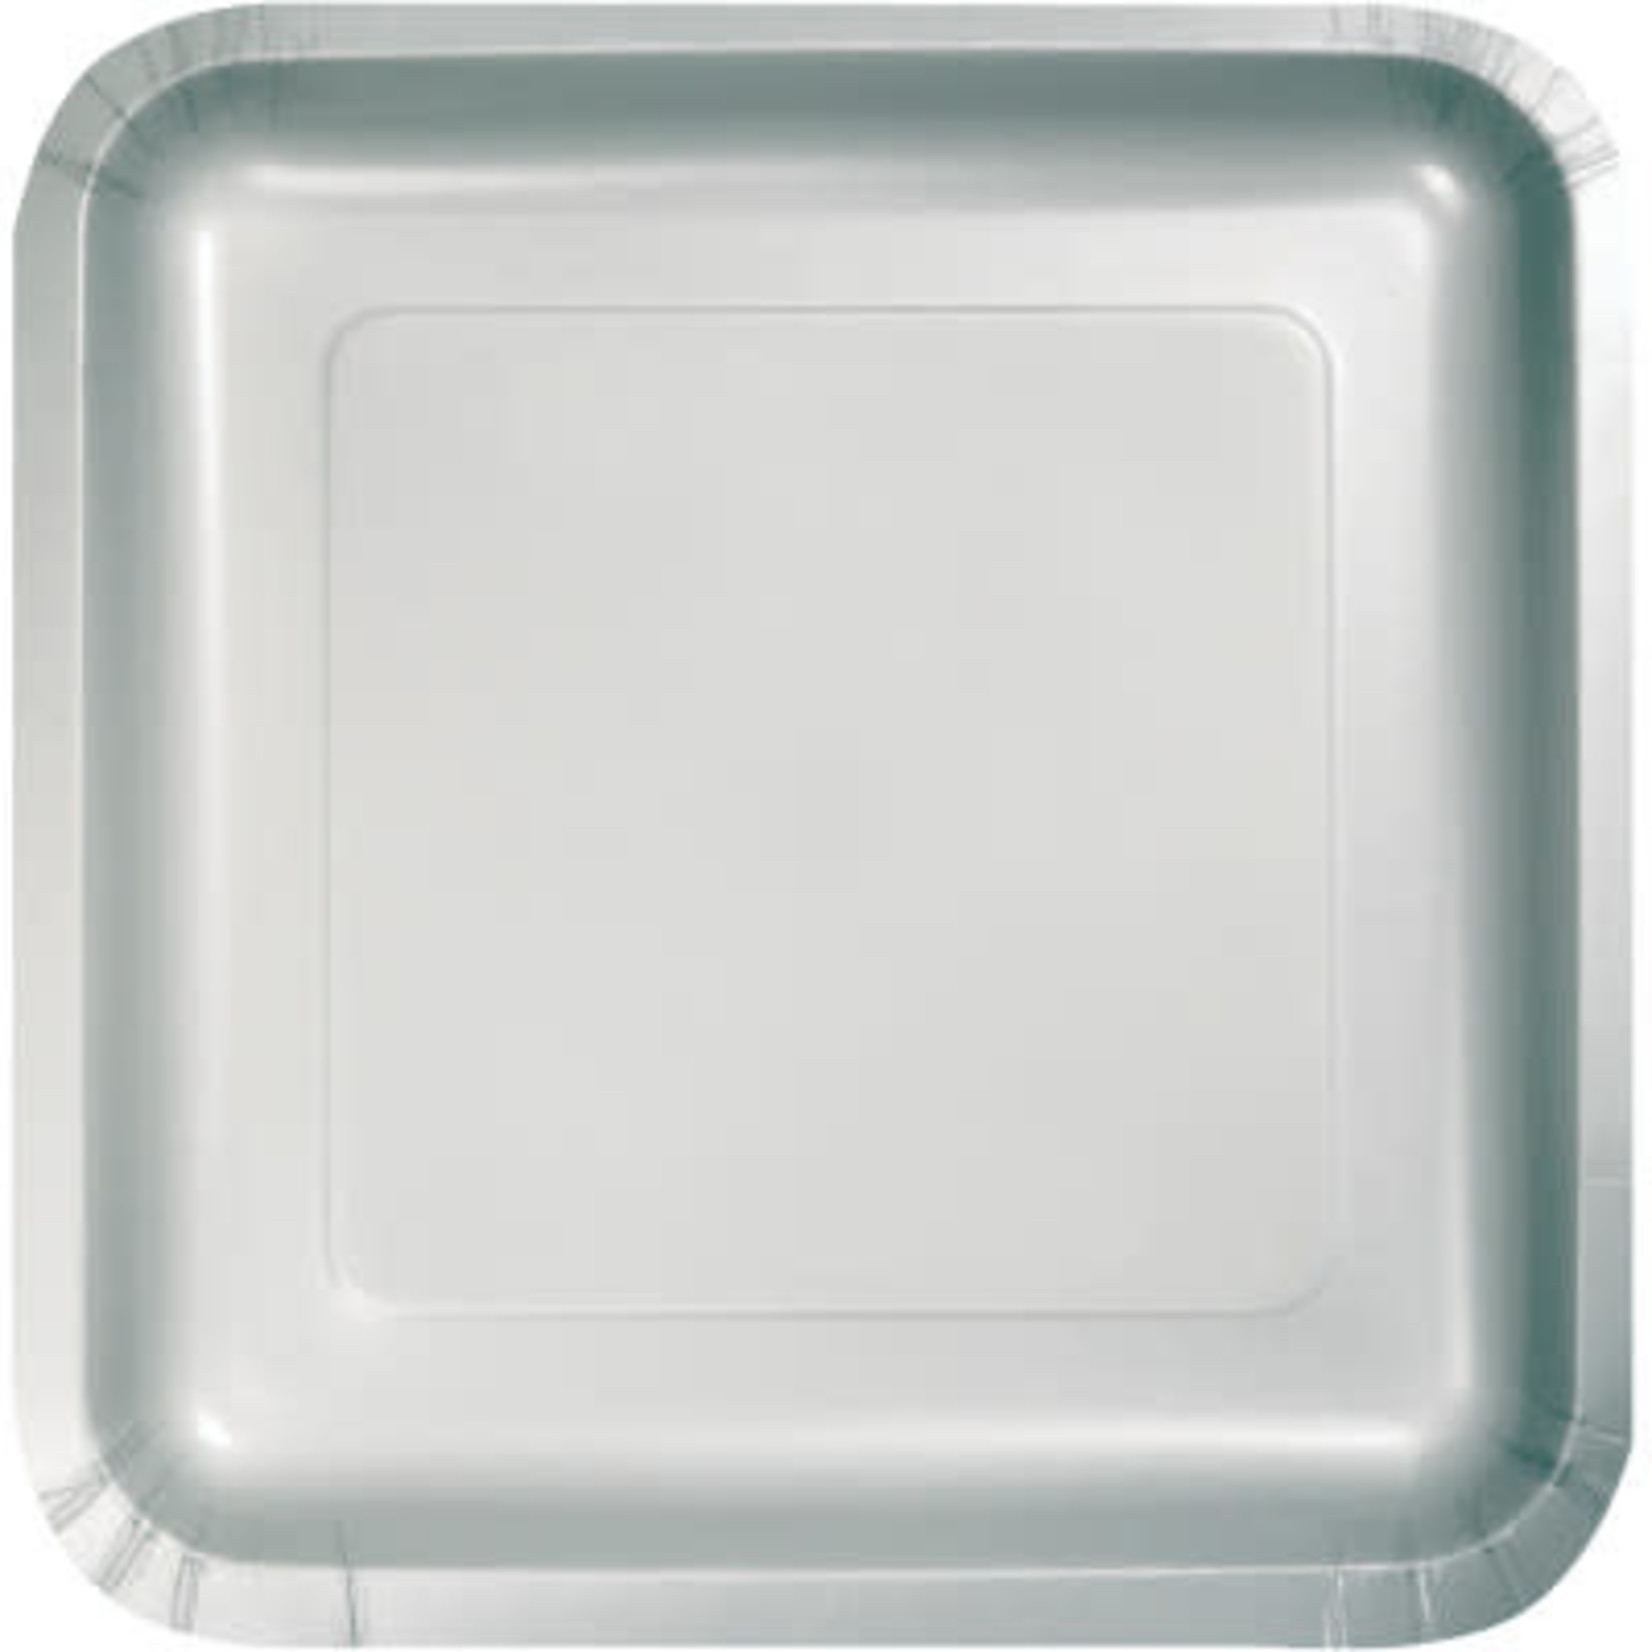 Touch of Color 7" Shimmering Silver Square Paper Plates - 18ct.